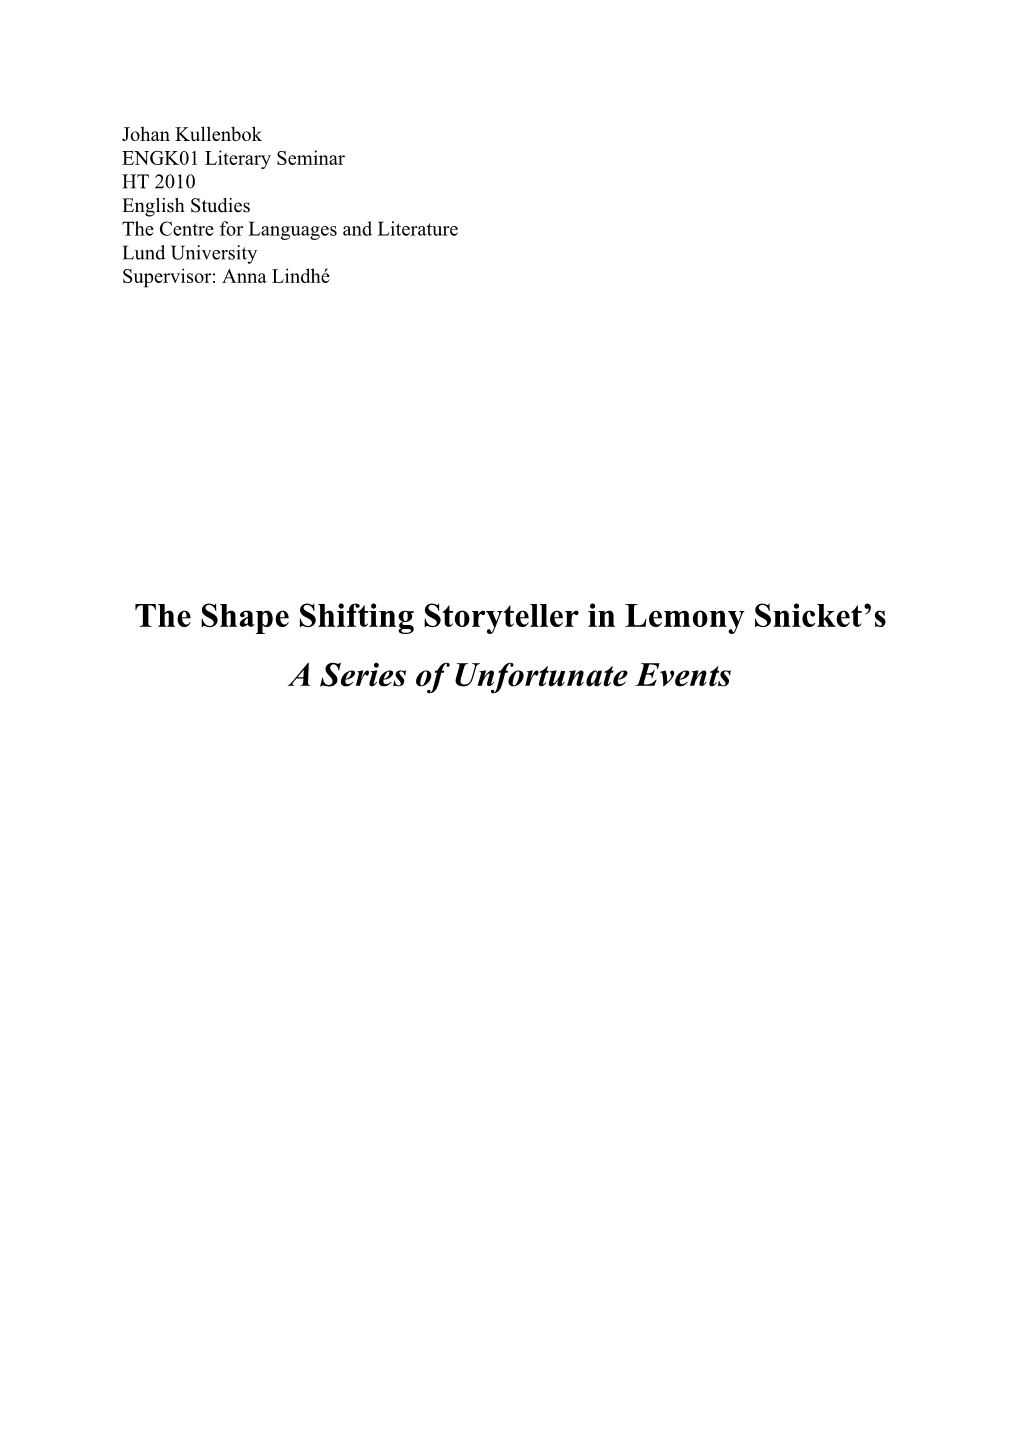 The Shape Shifting Storyteller in Lemony Snicket's a Series Of